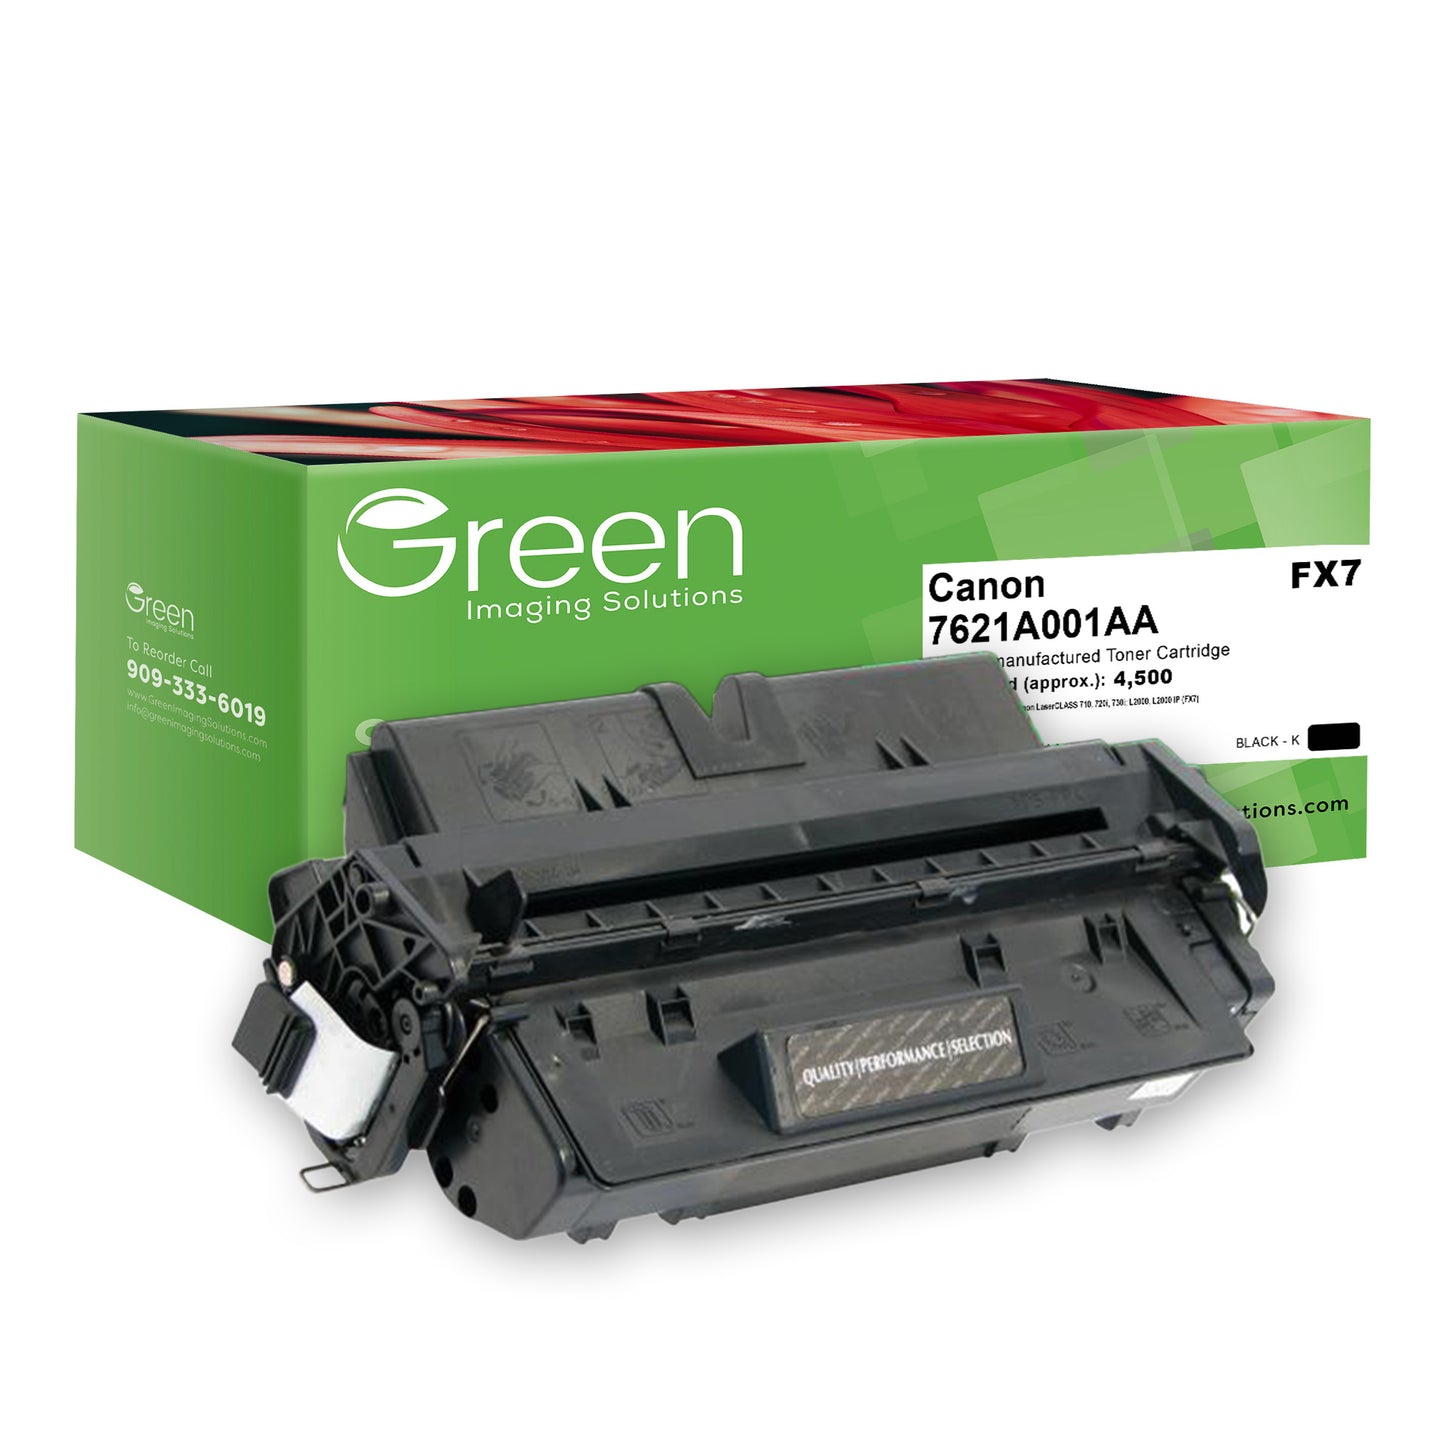 Green Imaging Solutions USA Remanufactured Toner Cartridge for Canon 7621A001AA (FX7)